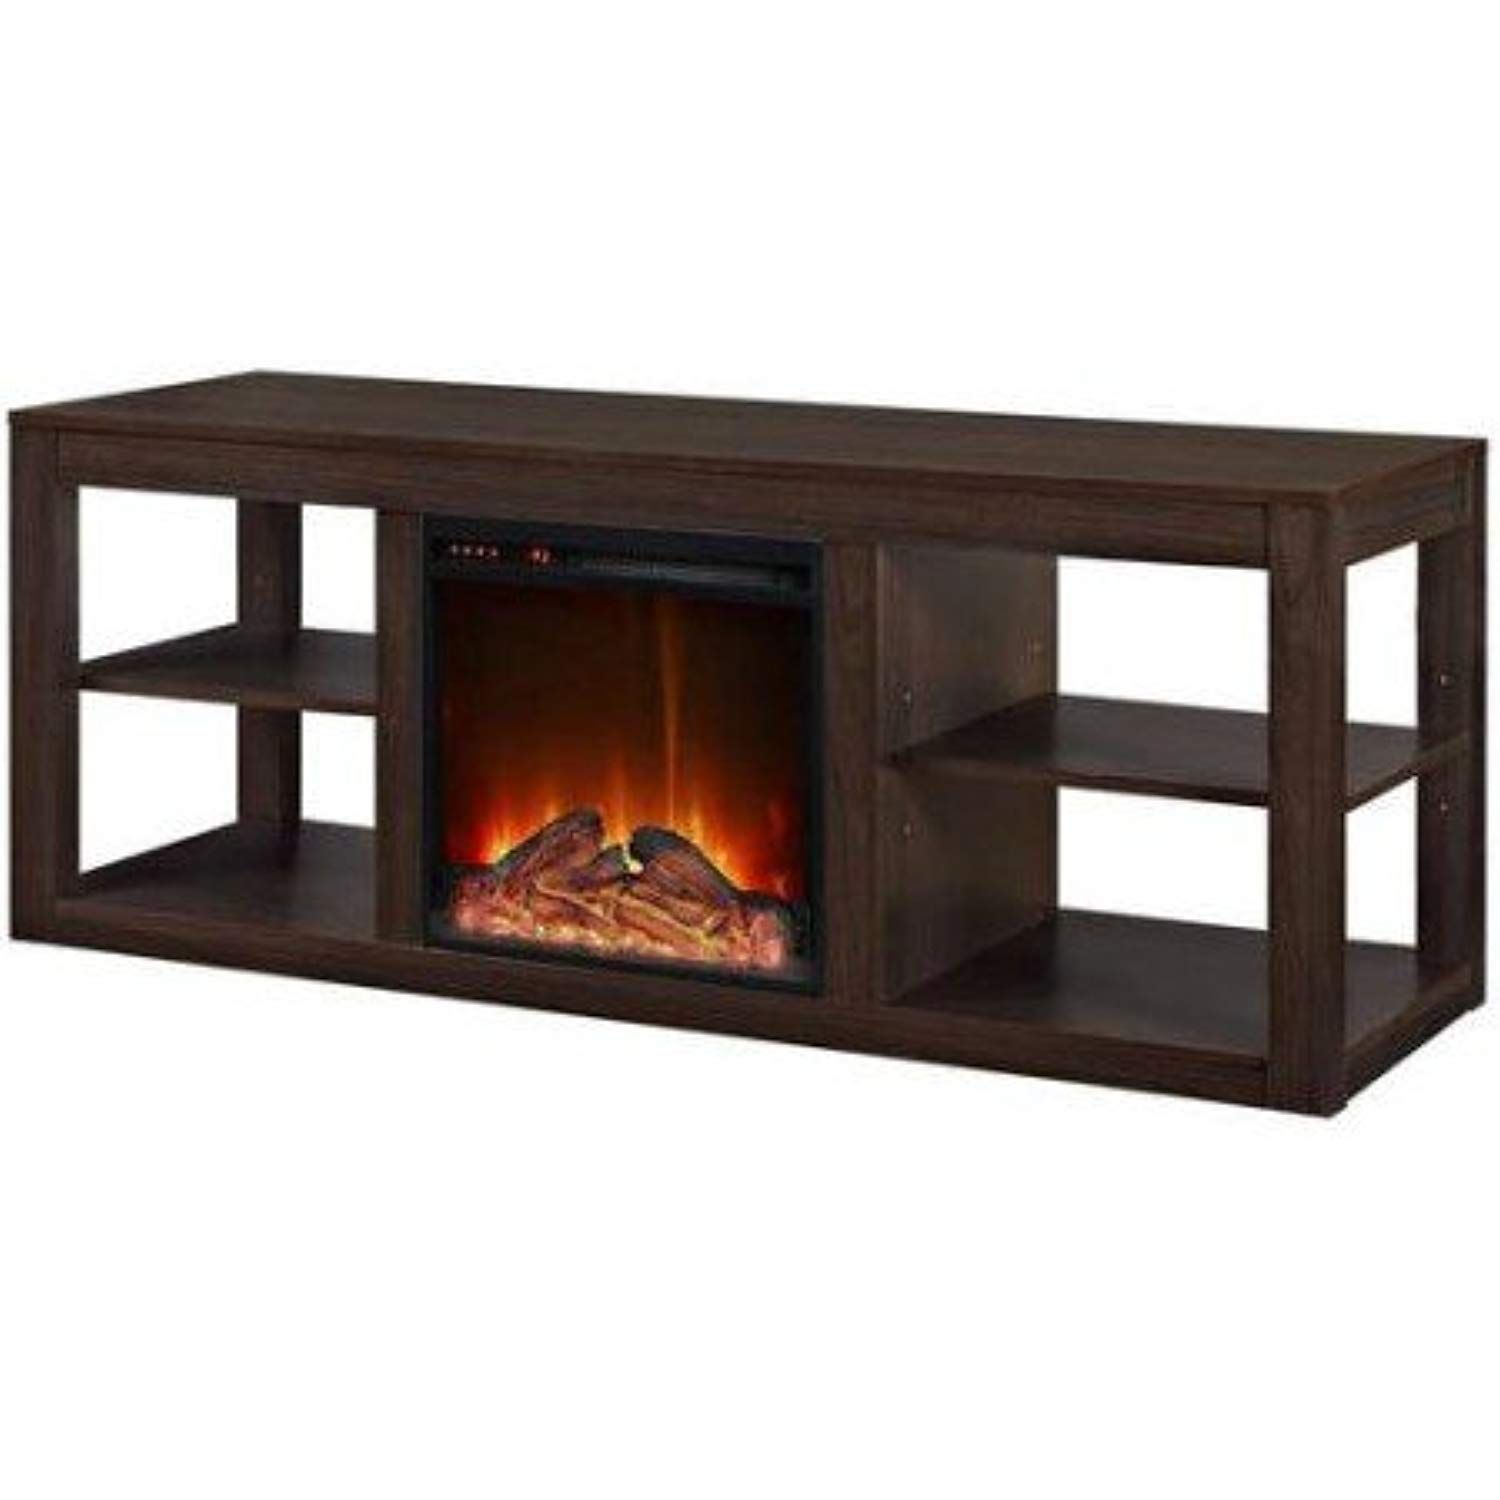 Real Flame Silverton Electric Fireplace Best Of Duraflame Freestanding Infrared Quartz Fireplace Stove